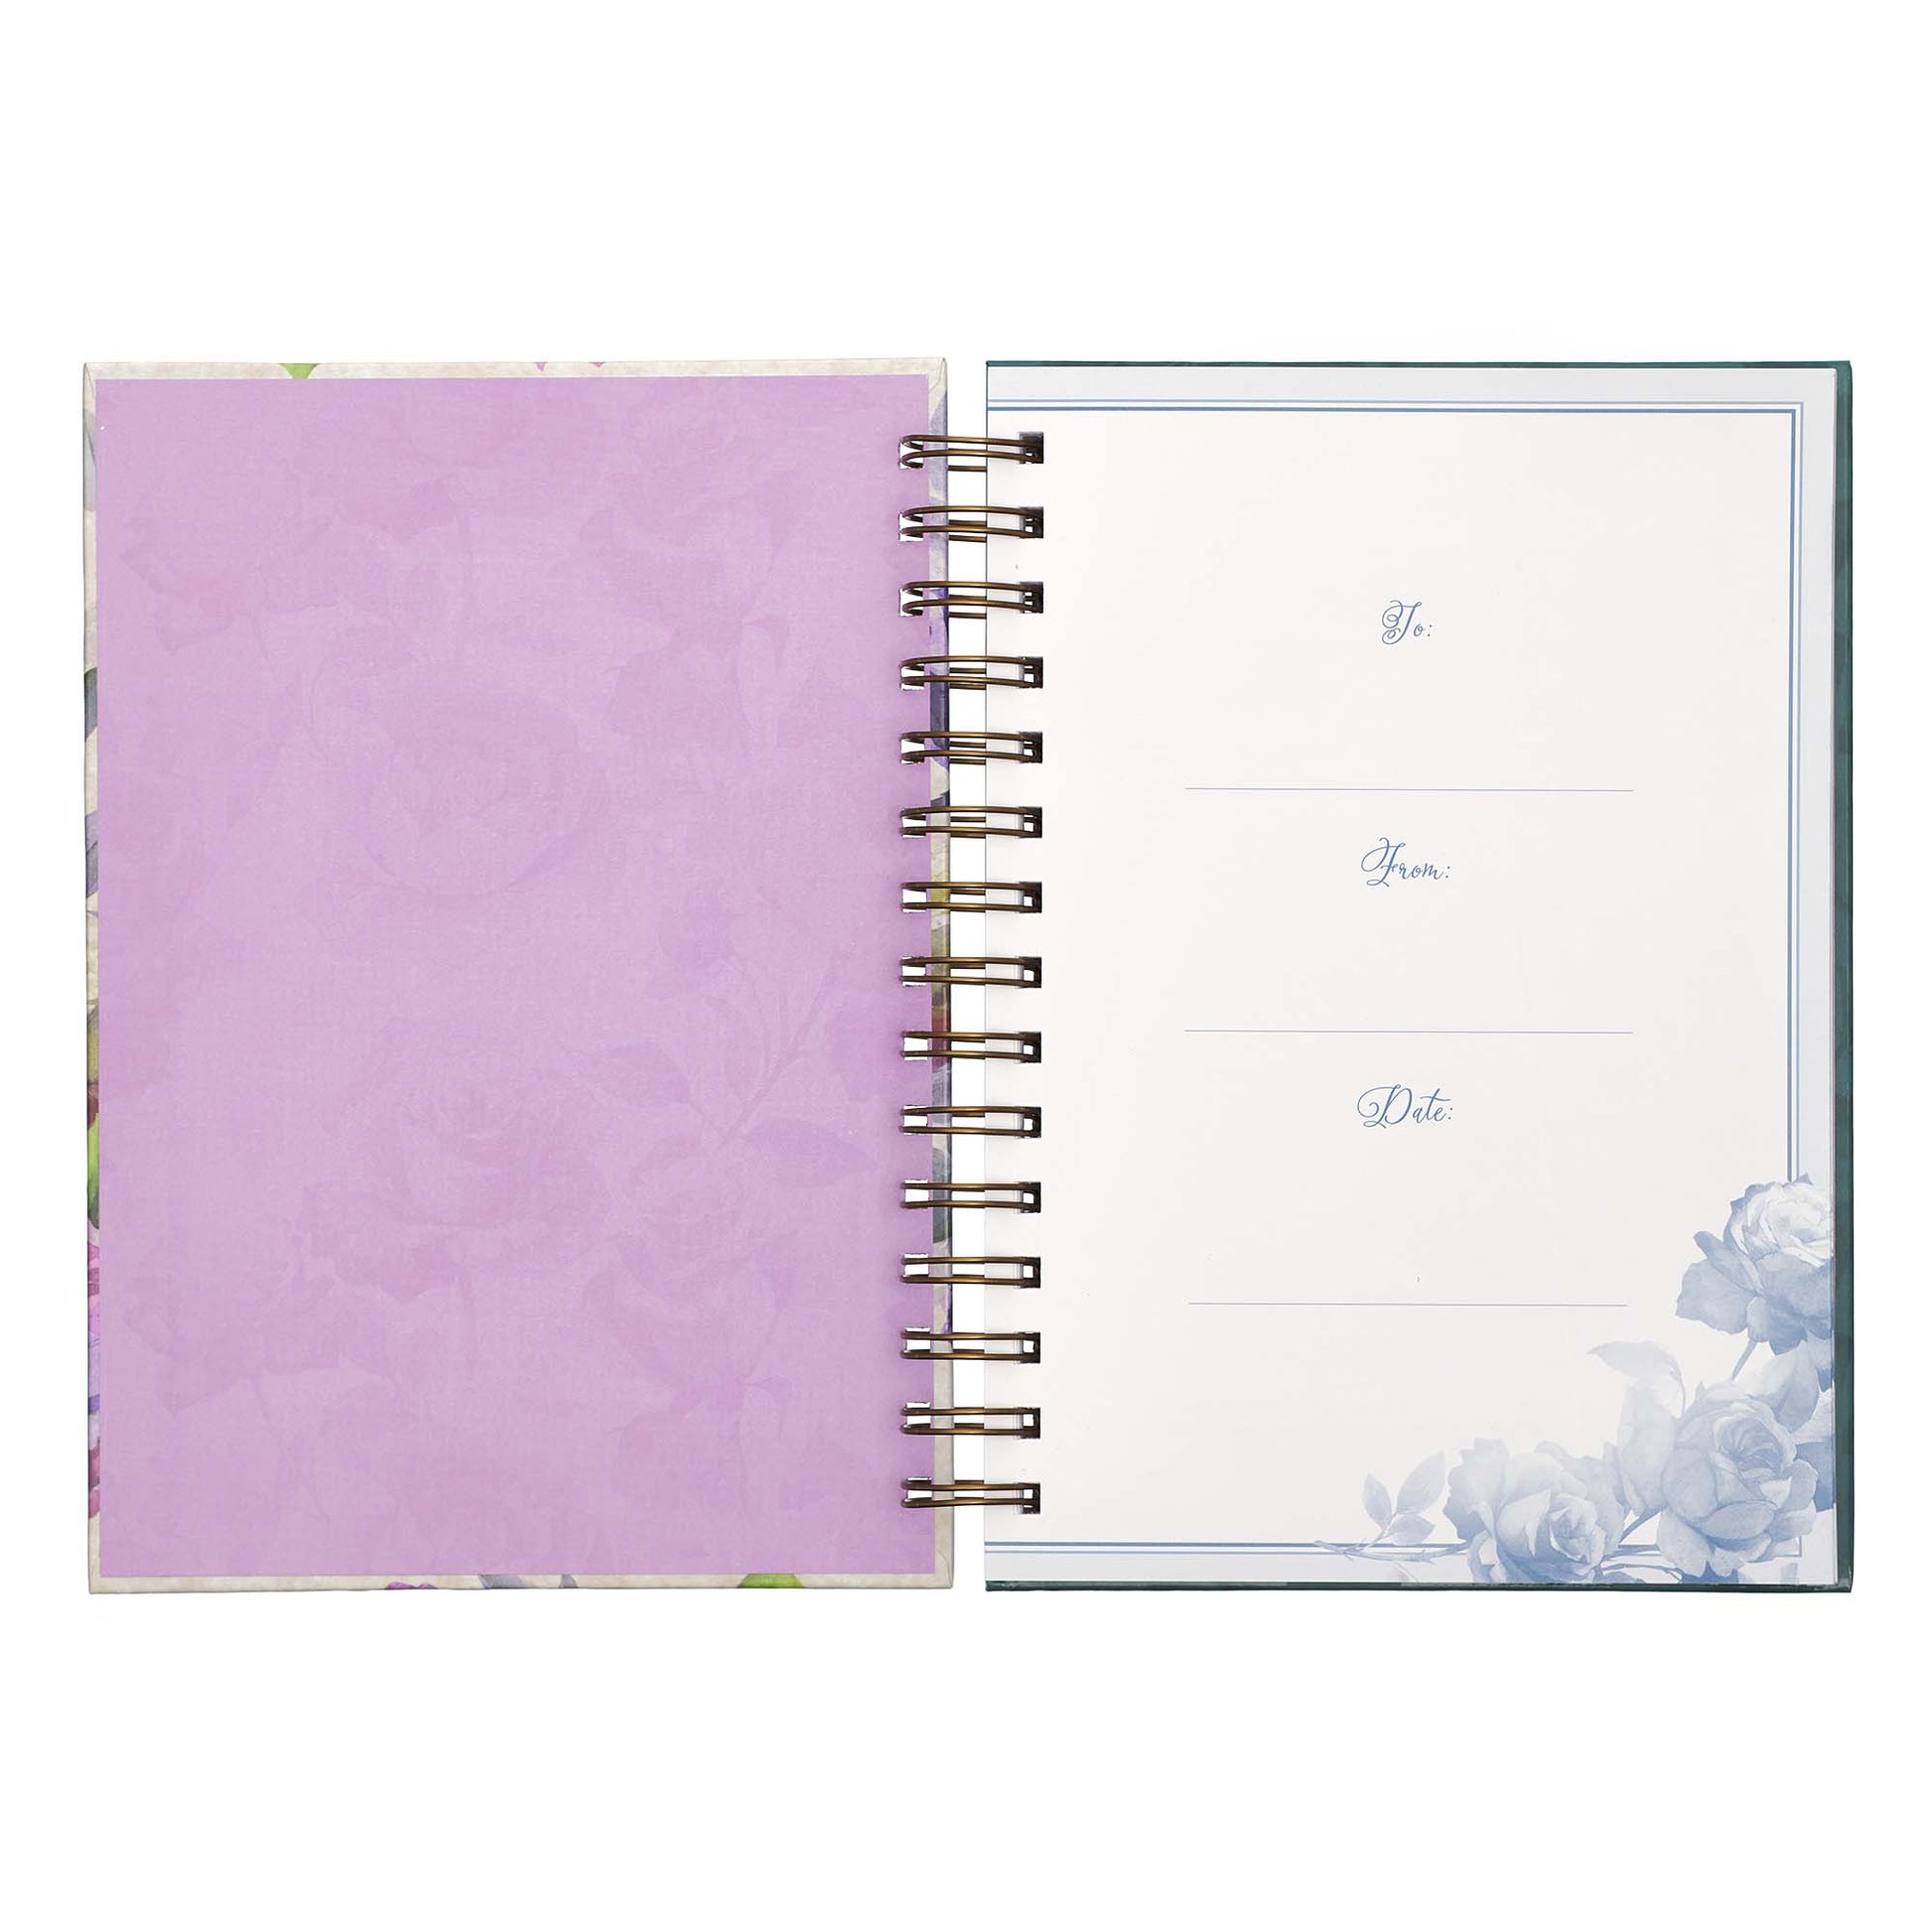 Be Still and Know Large Wirebound Journal in Purple Florals - Psalm 46:10 - The Christian Gift Company